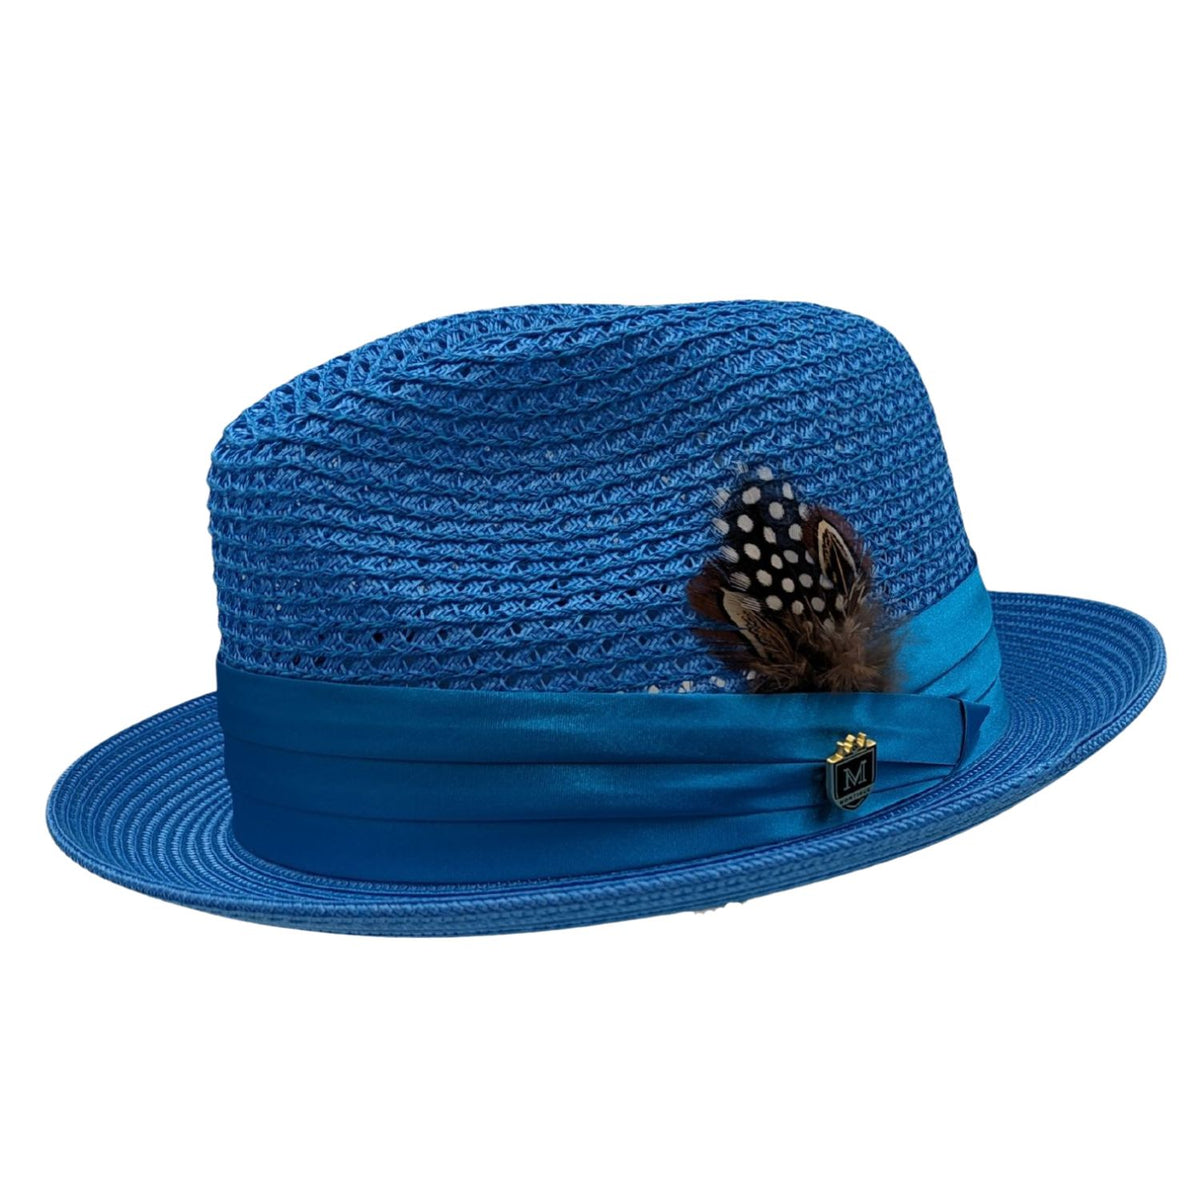 Glossaric Collection: Aqua Solid Color Pinch Braided Fedora Hat – Suits ...